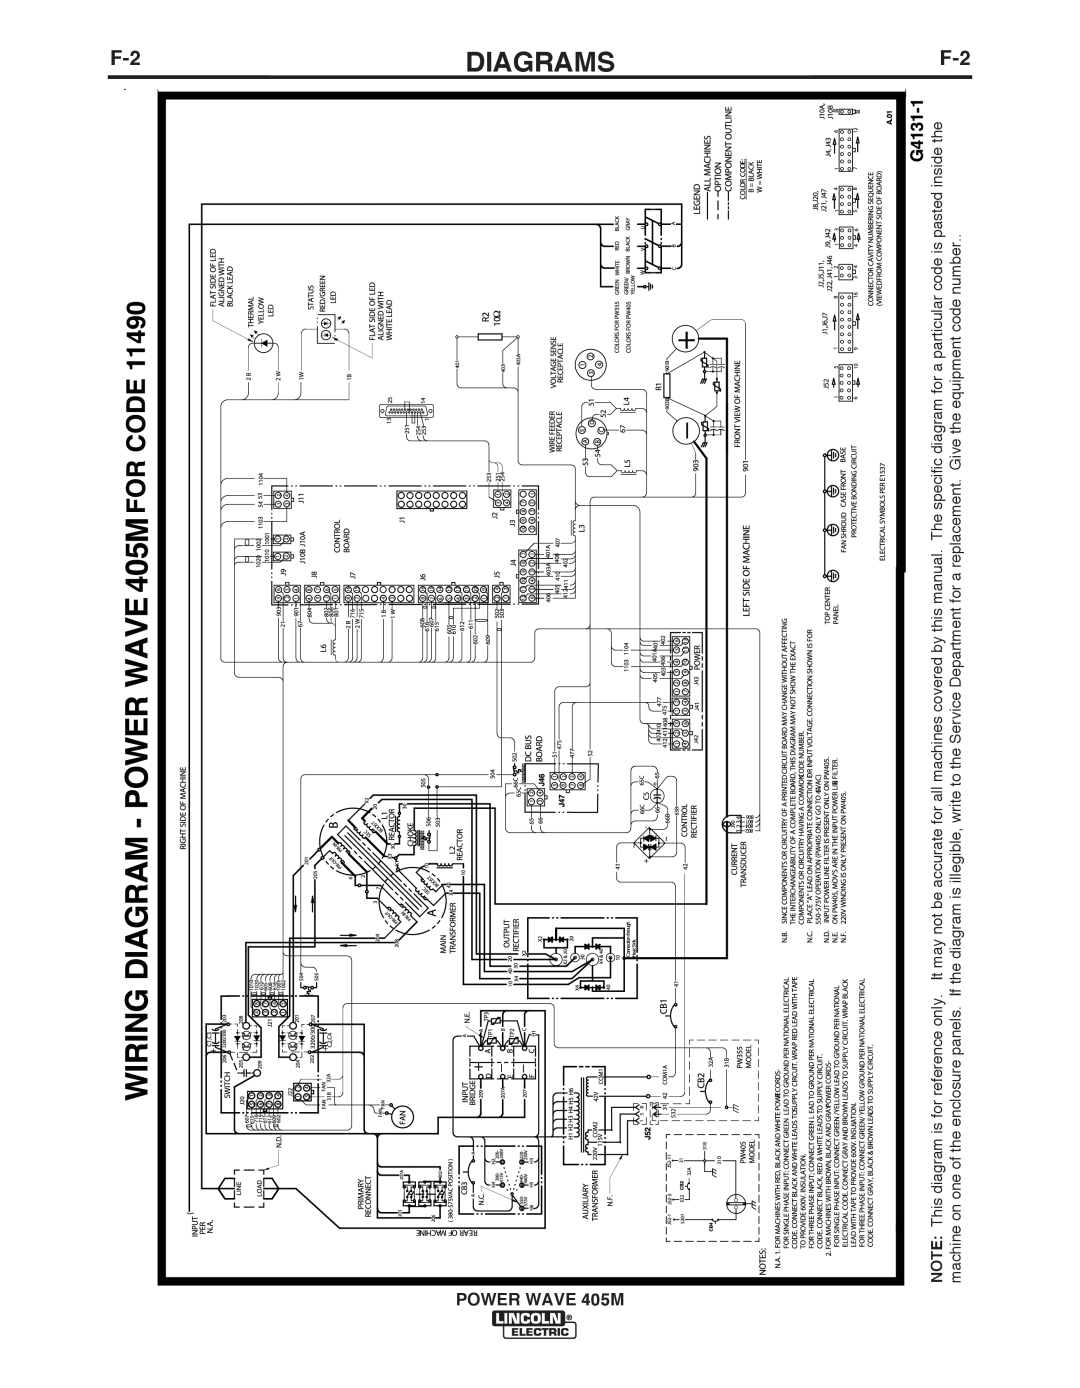 Lincoln Electric IM846-A manual Diagrams, POWER WAVE 405M 